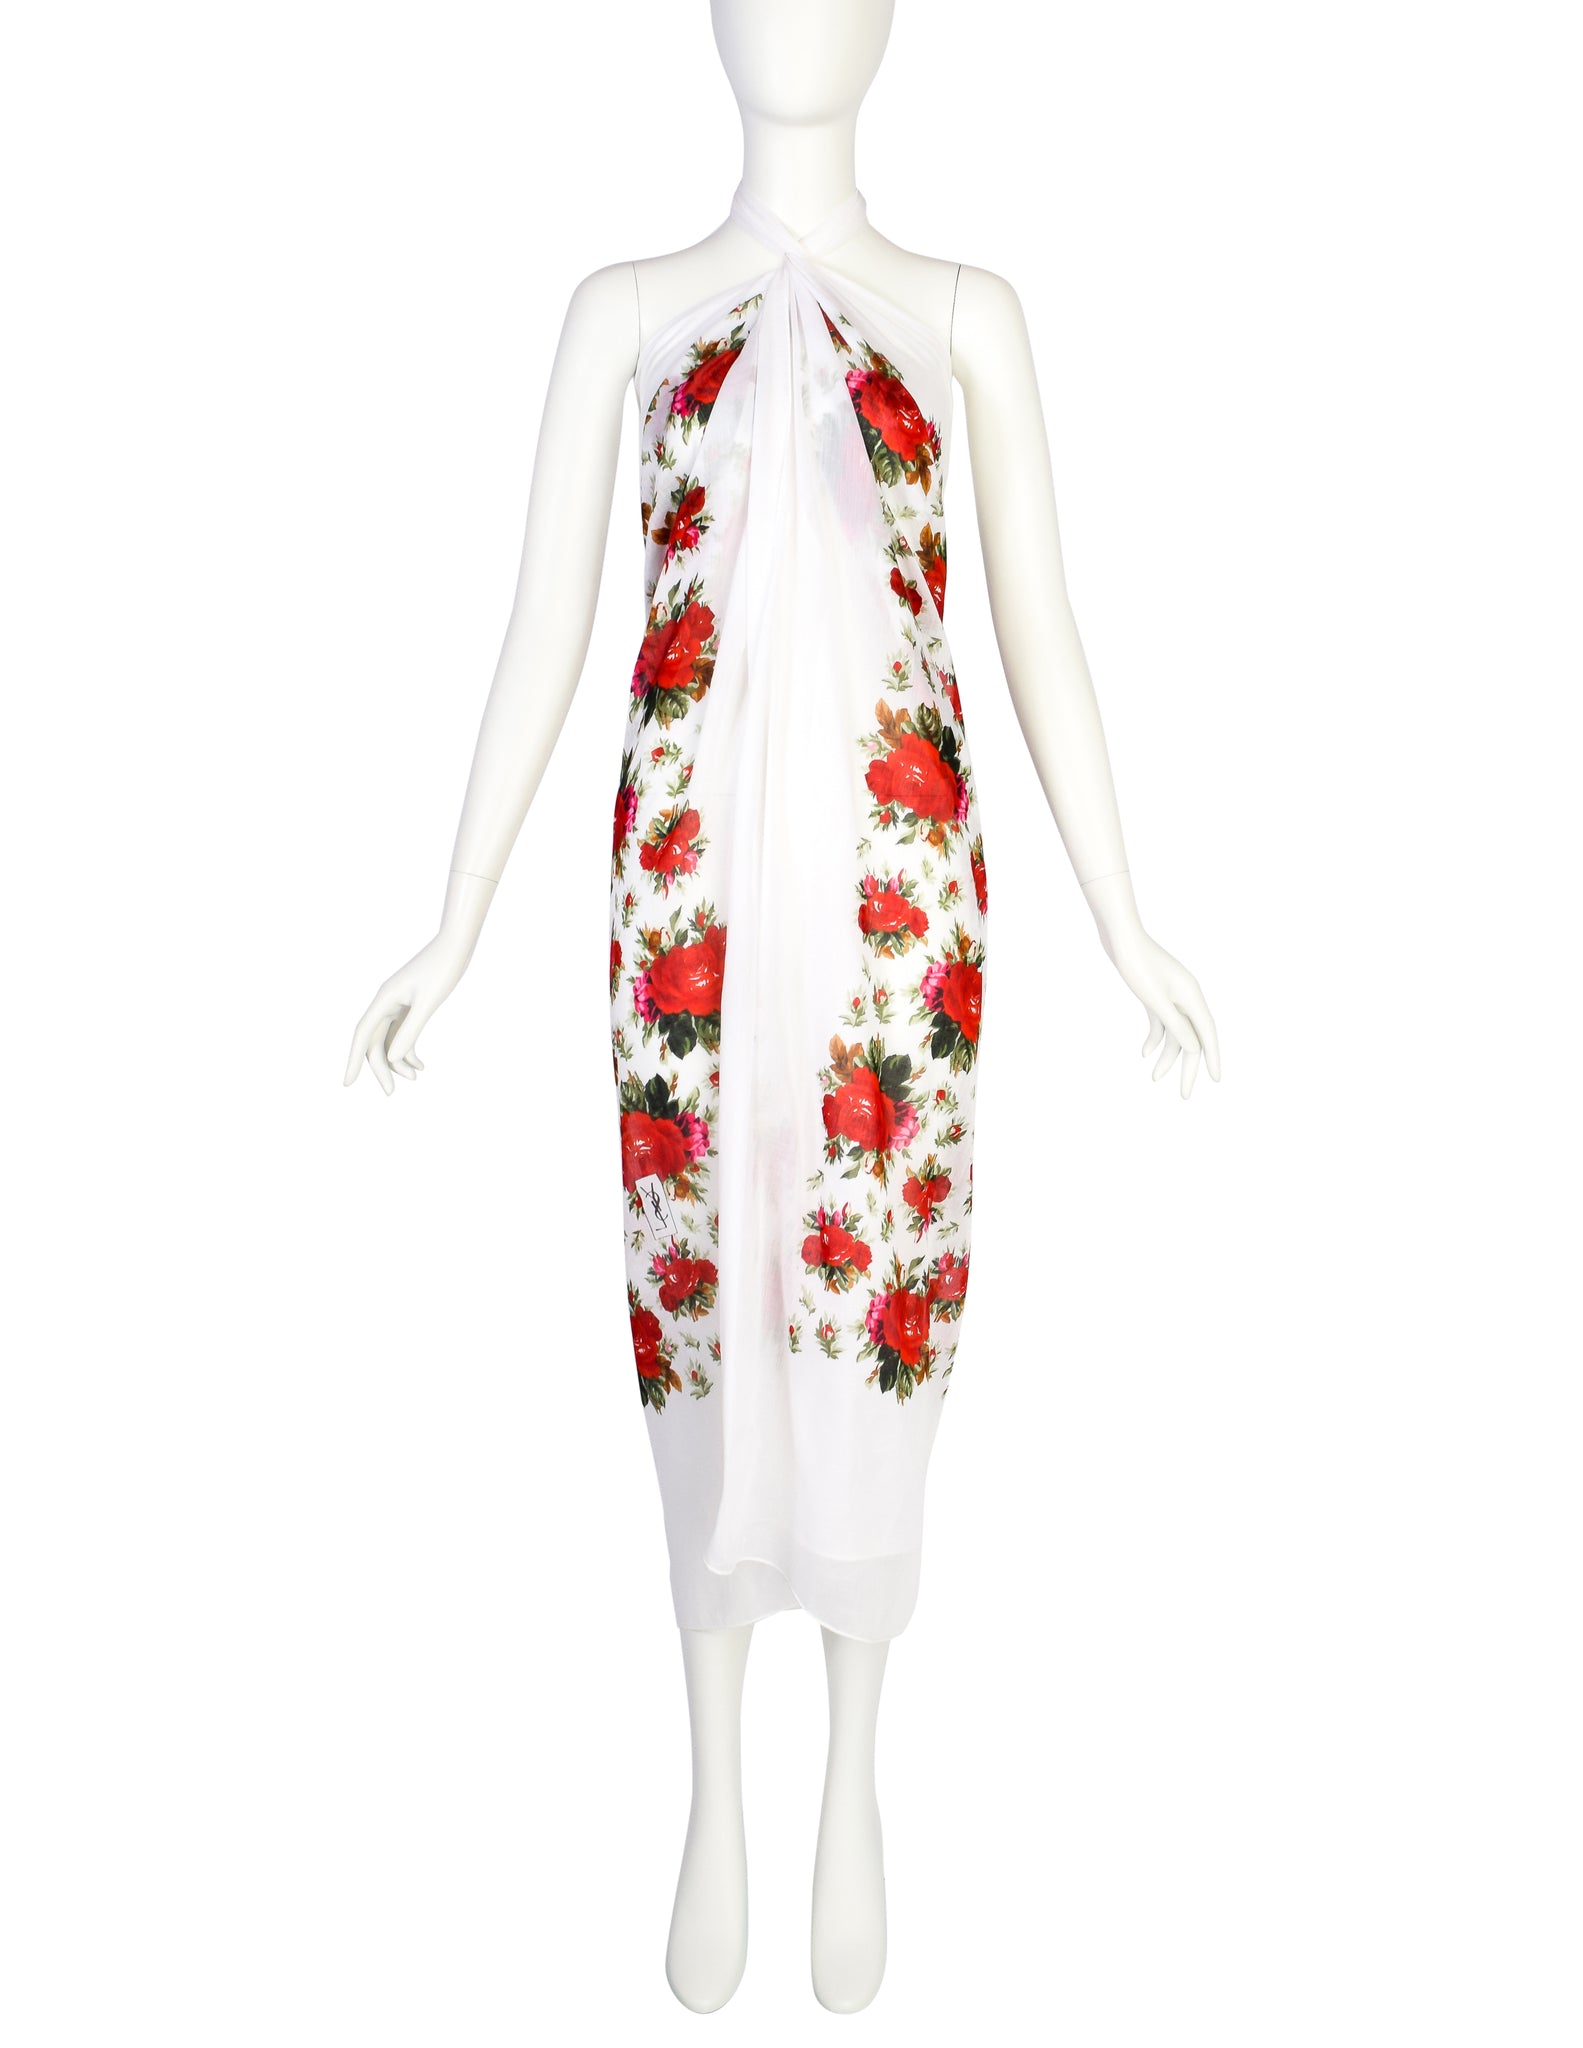 Yves Saint Laurent Vintage SS 1977 Spanish Collection White Rose Print Oversized Cotton Pareo Sarong Wrap Scarf